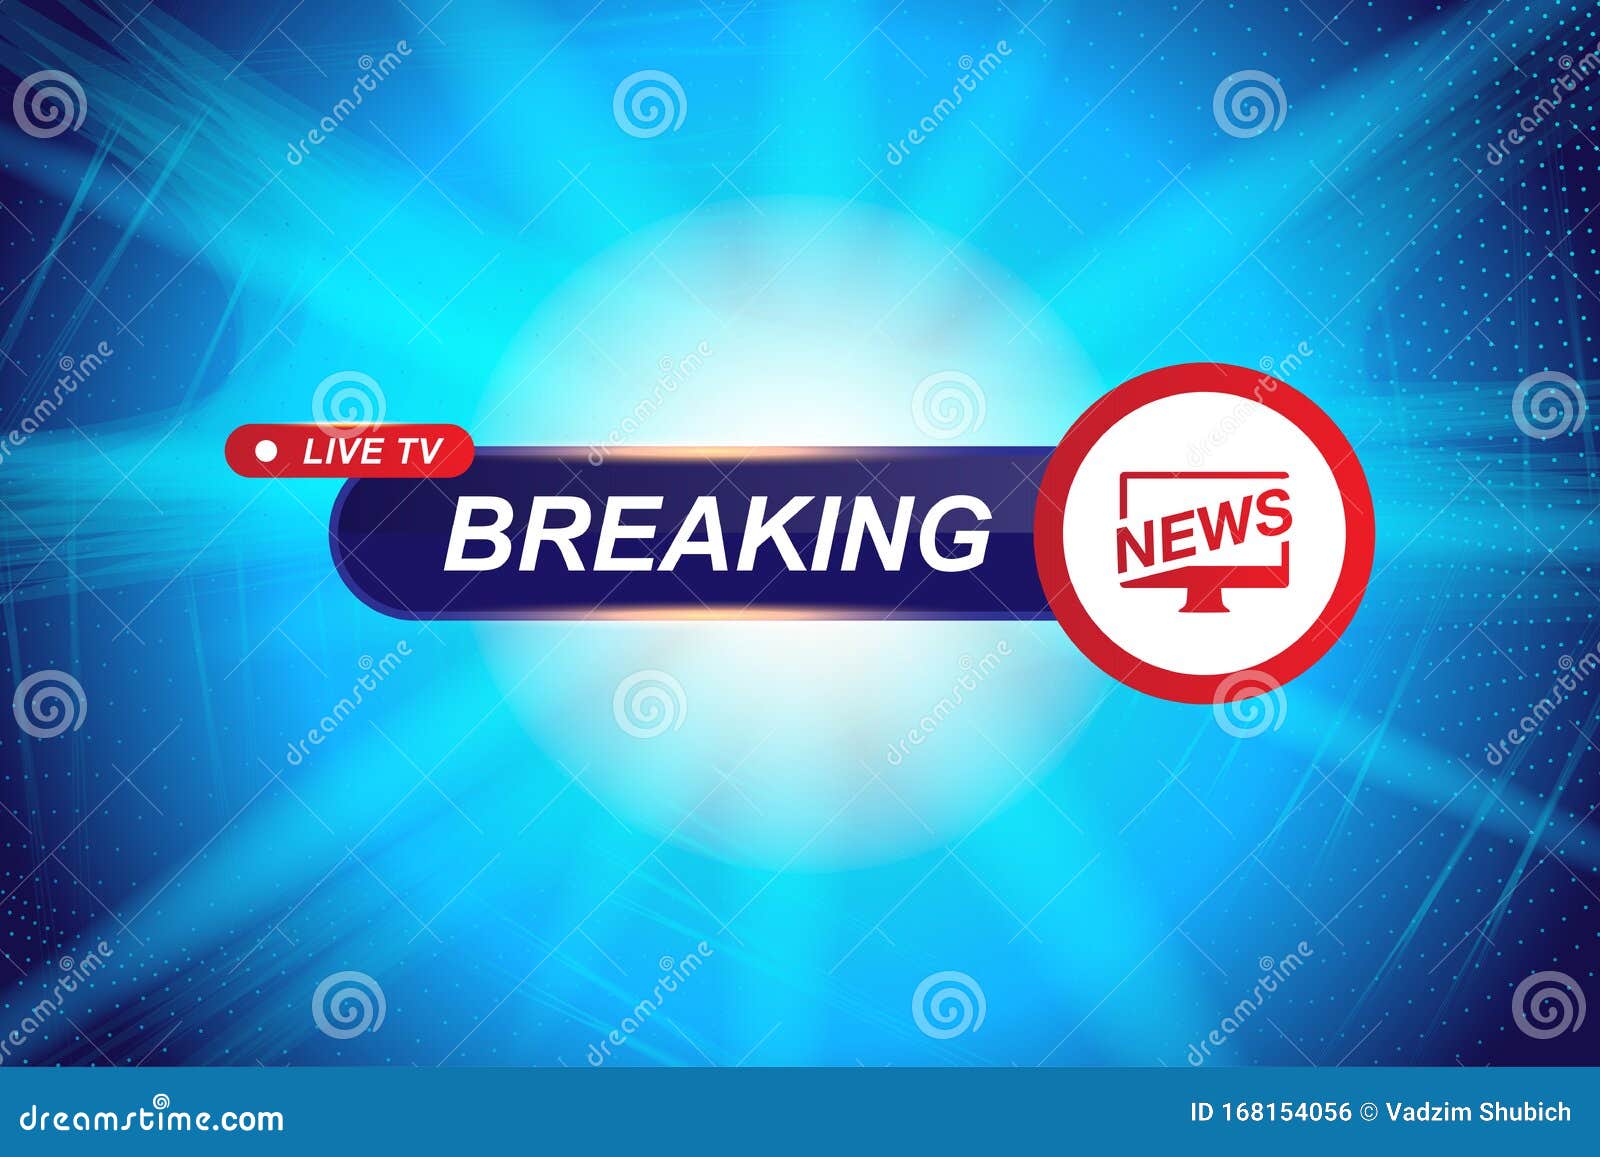 Breaking News Template Title With Technology Background For Screen Tv Channel Flat Vector Illustration Eps10 Stock Illustration Illustration Of Backdrop Background